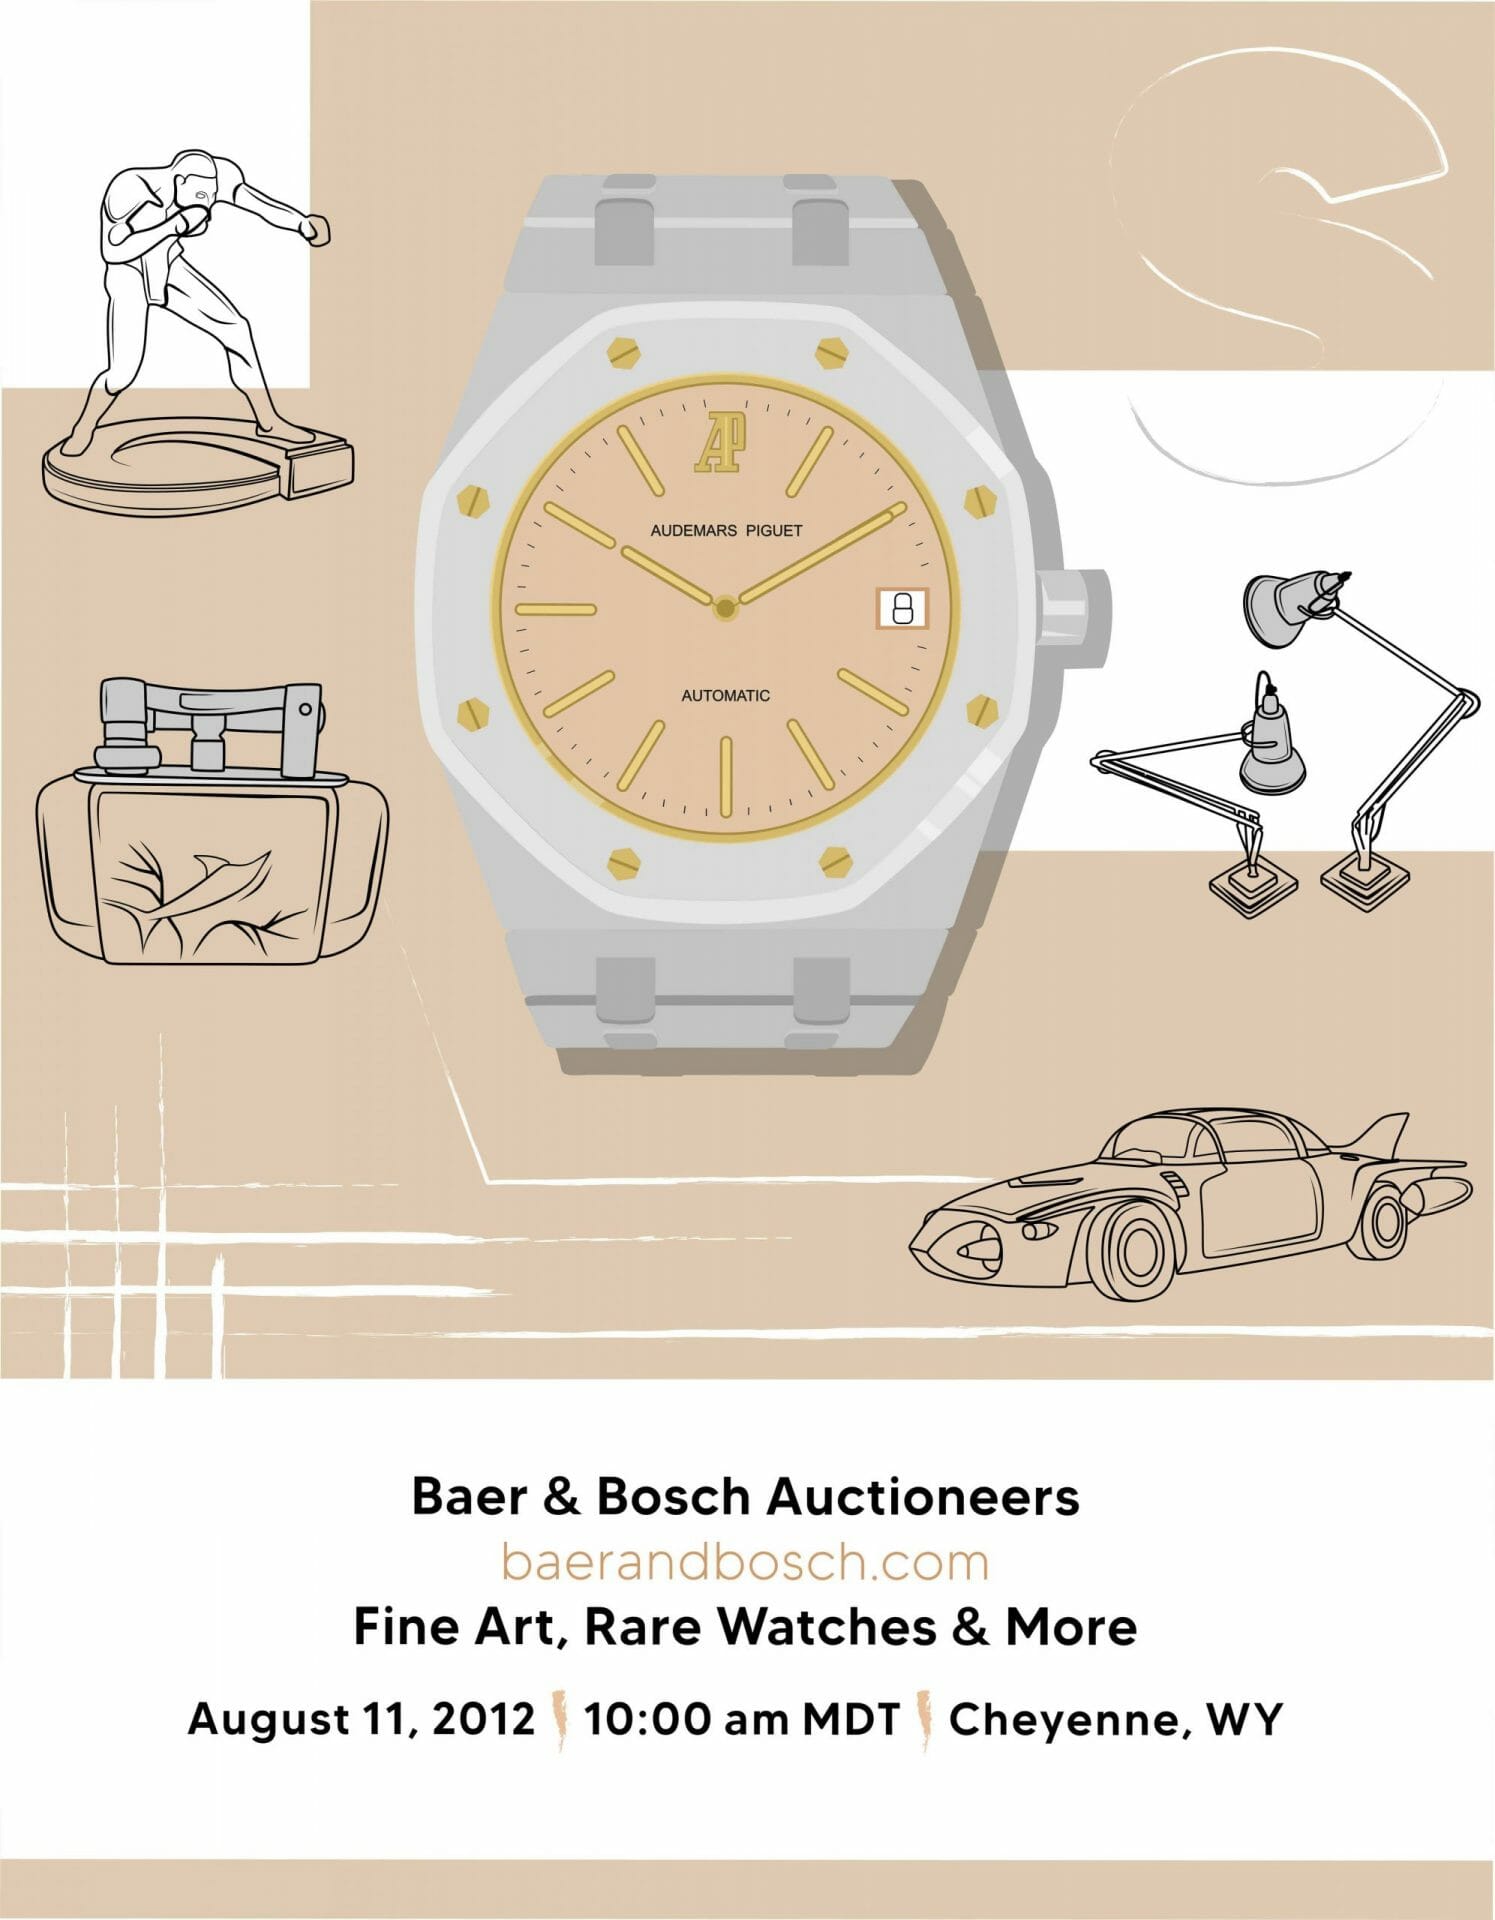 Fine Art, Rare Watches & More August 11, 2012 Auction Catalog - Baer & Bosch Auctioneers